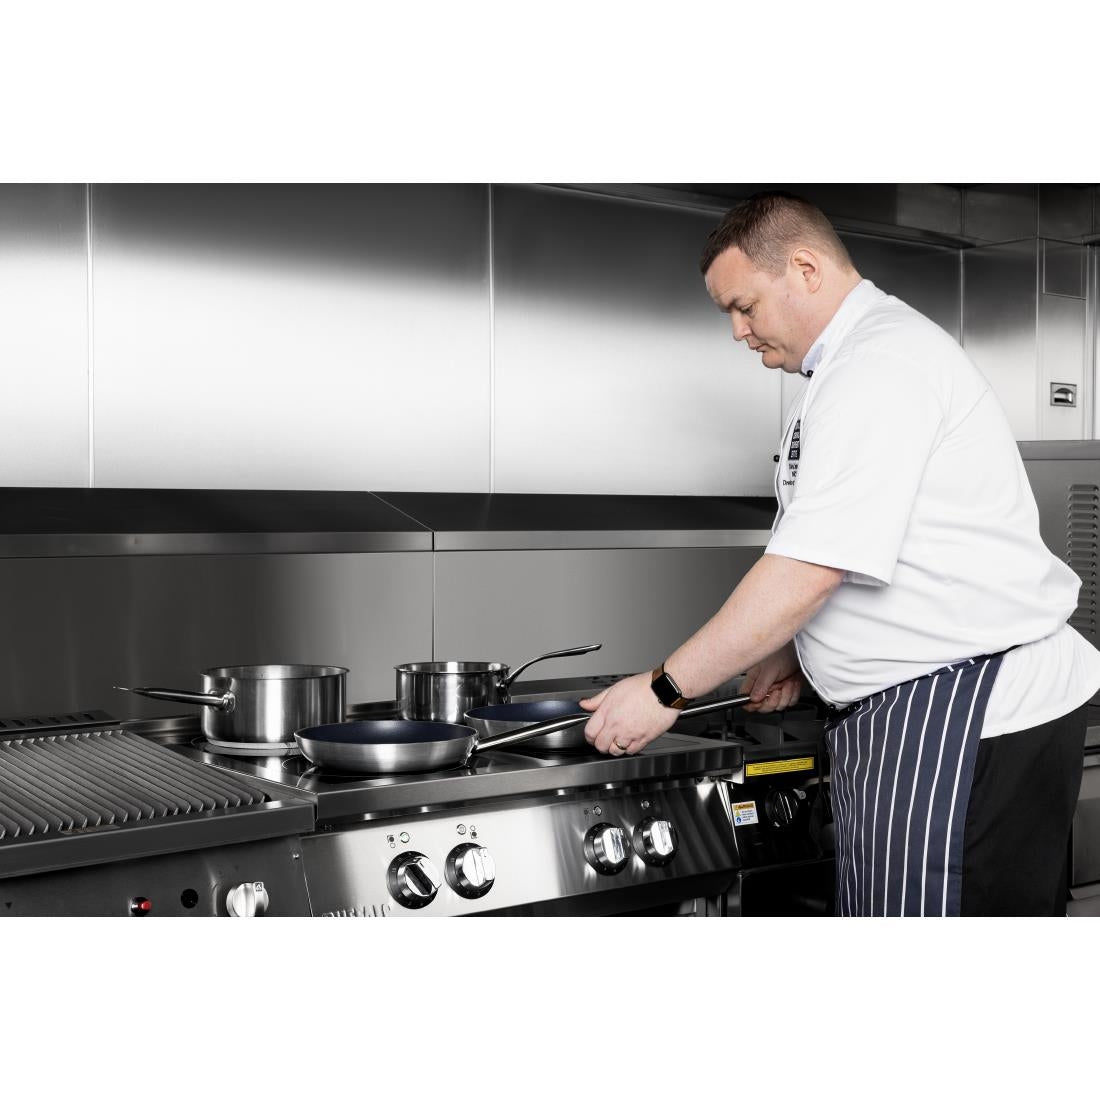 Buffalo Freestanding 4 Zone Induction Hob Pre-Order Offer JD Catering Equipment Solutions Ltd